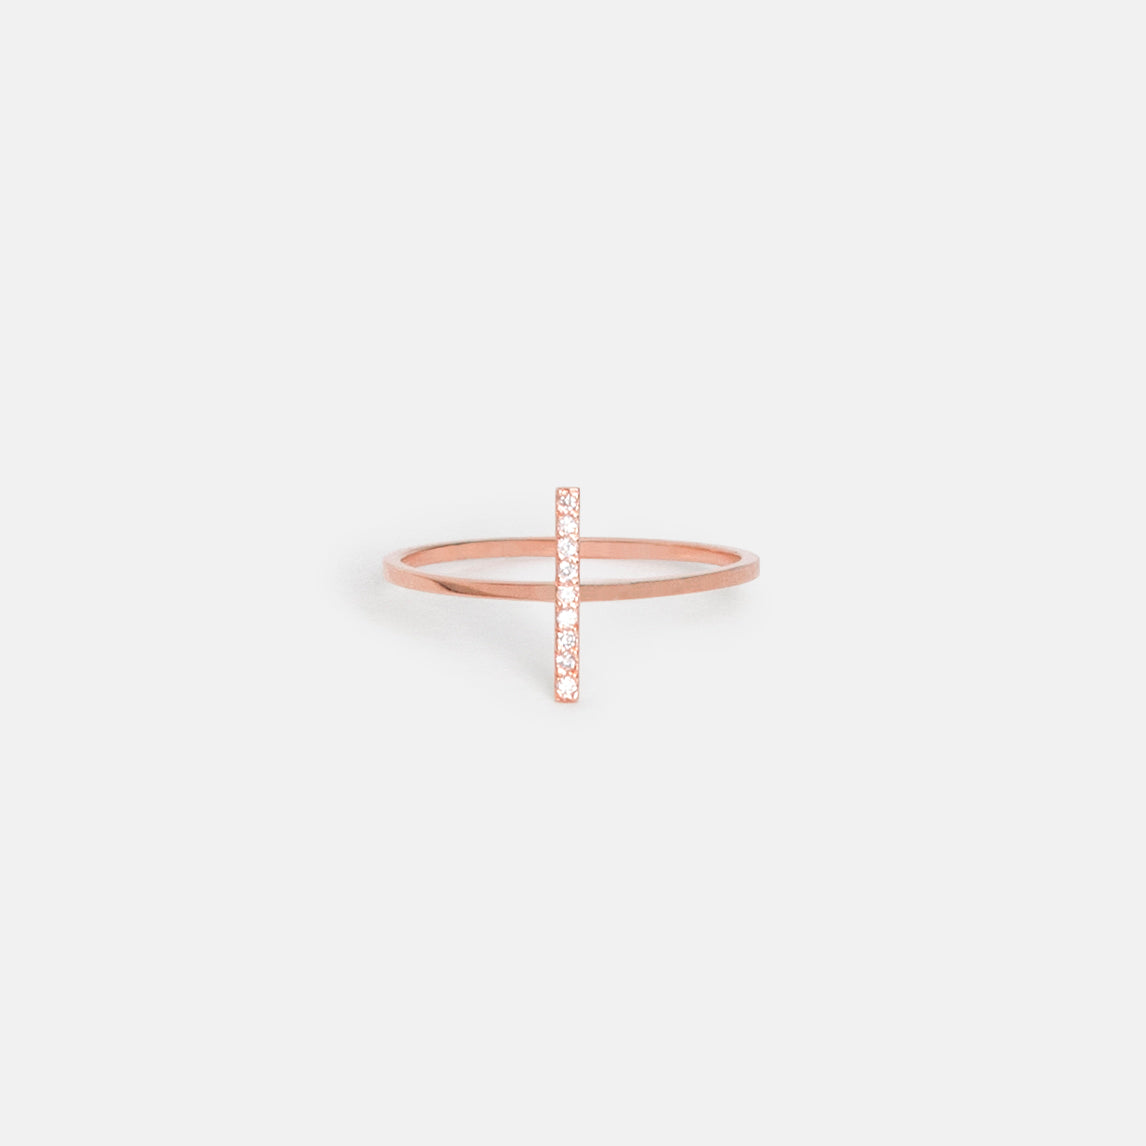 Steva Thin Ring in 14k Rose Gold set with White Diamonds by SHW Fine Jewelry